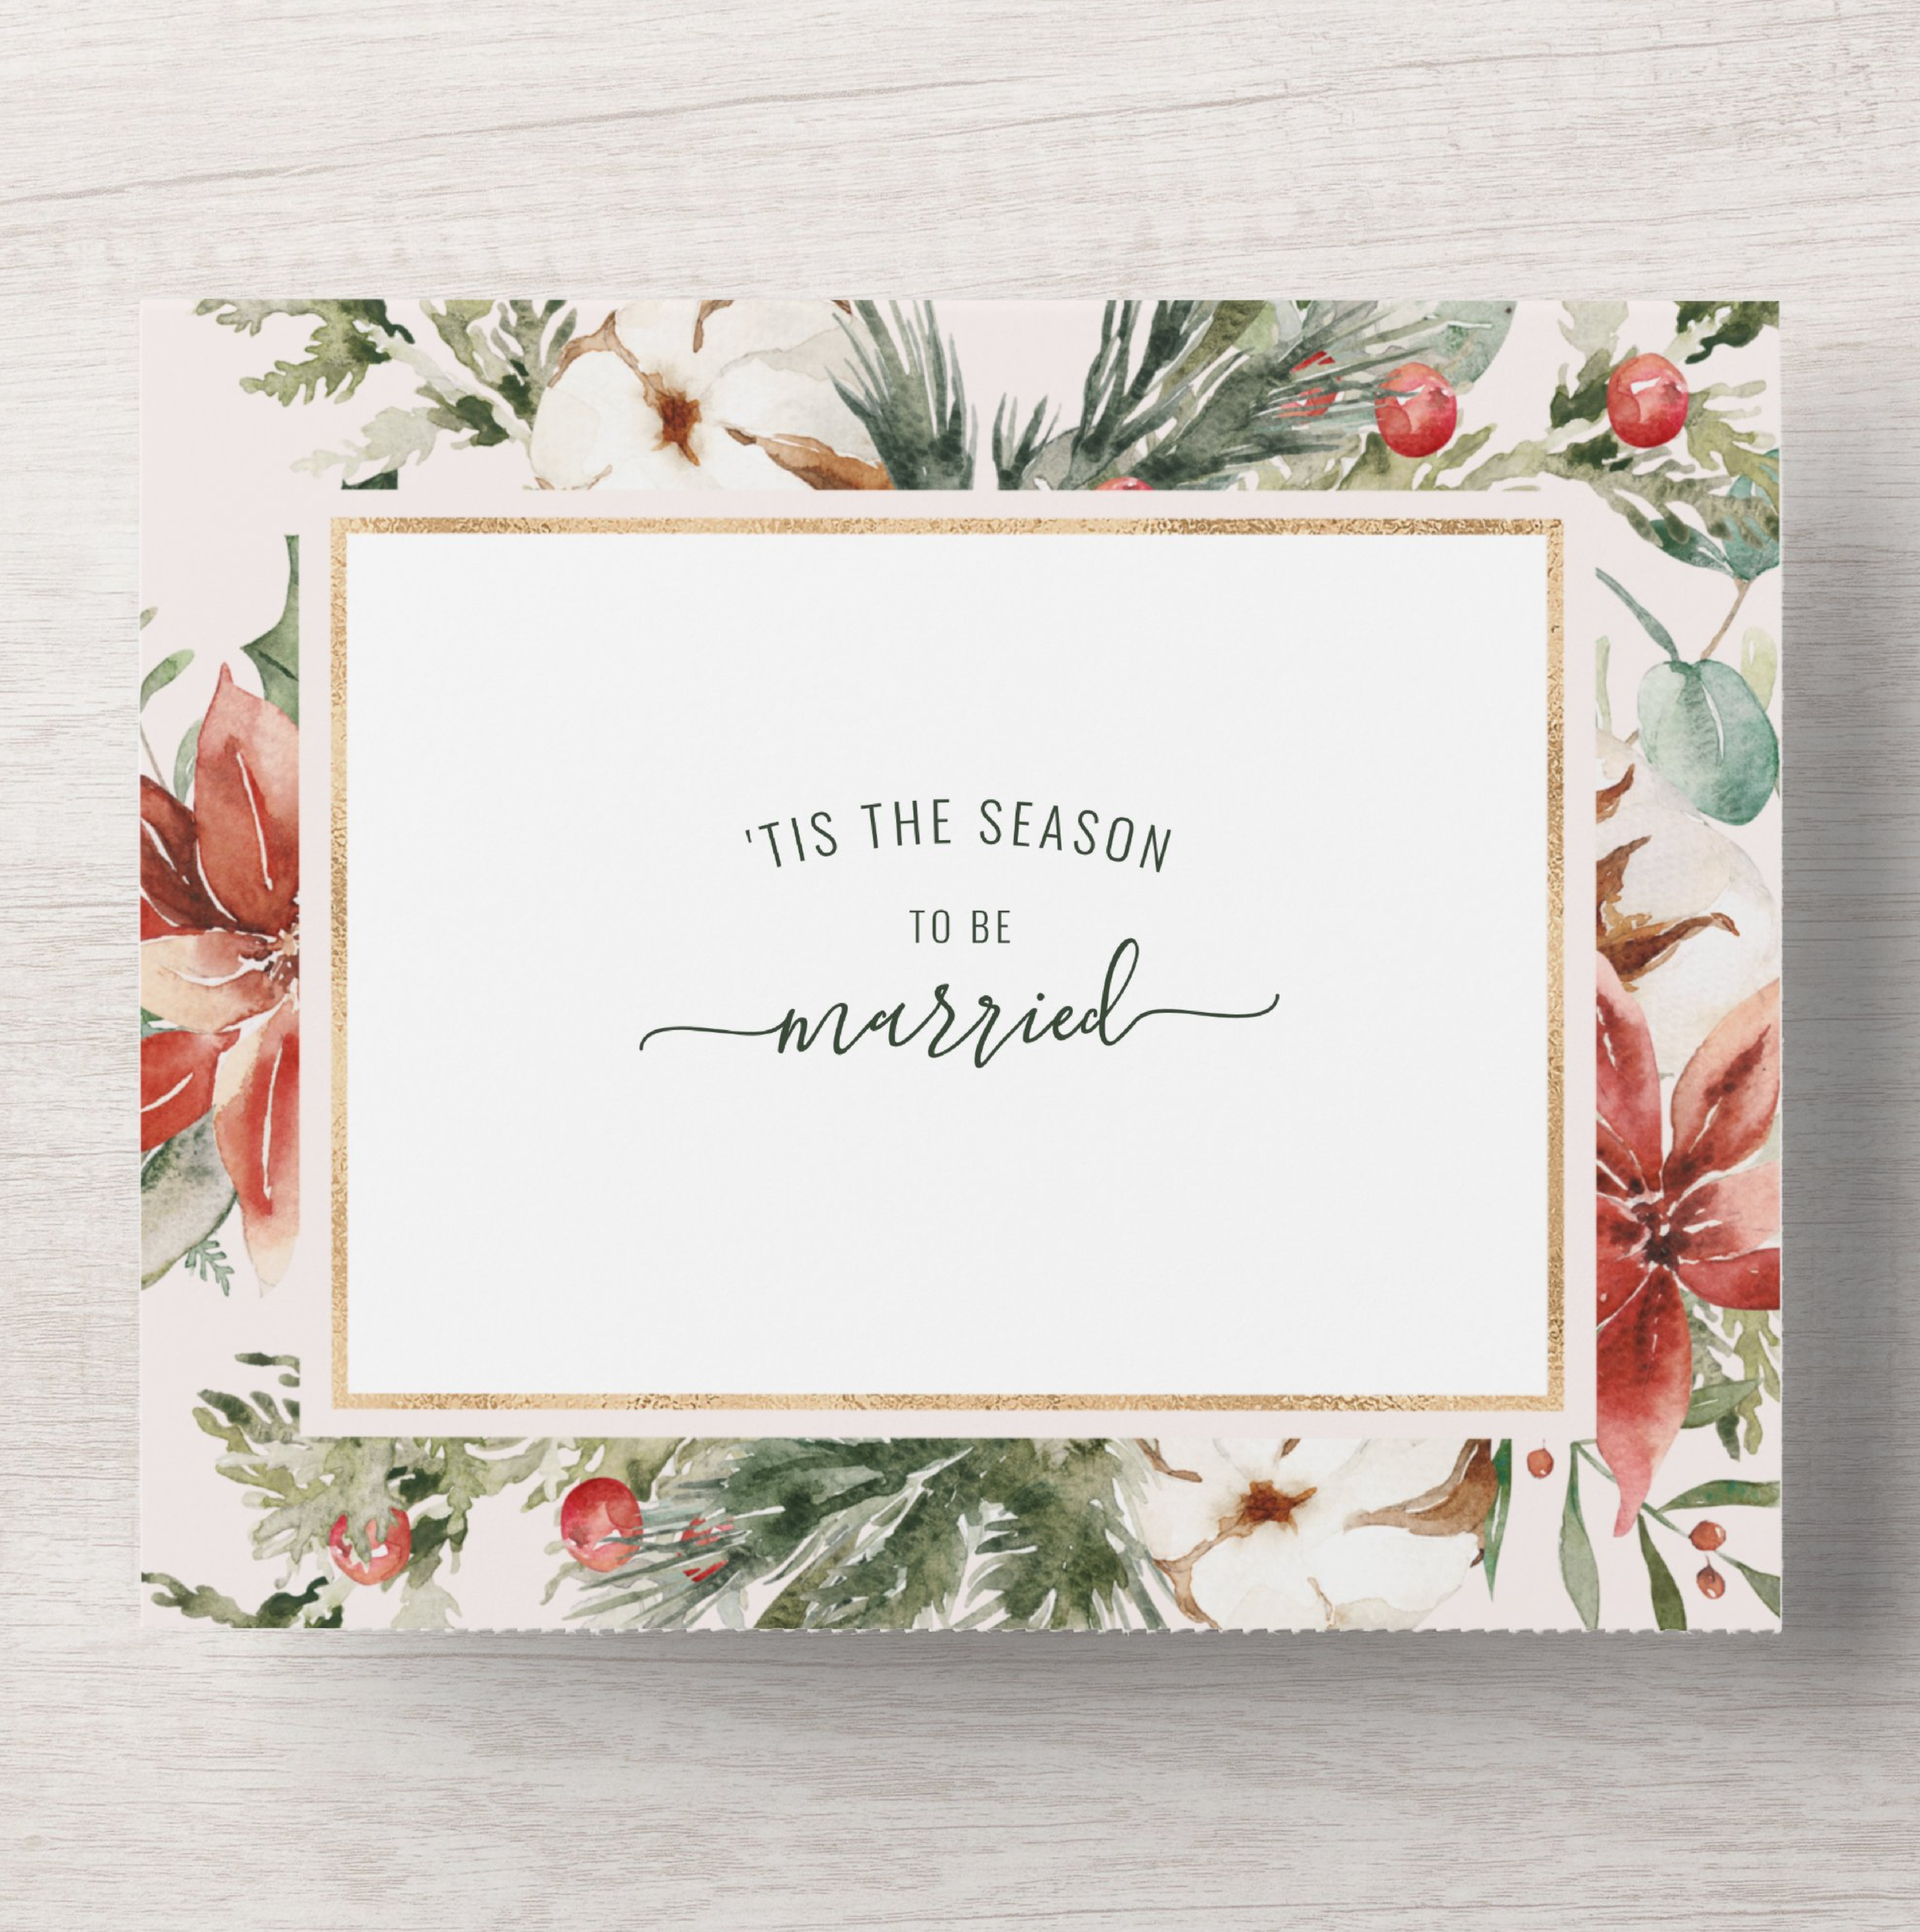 tis_the_season_christmas_wedding_floral_all_in_one_invitation-r3c447a070010465aa1bcc4a7fe497d9b_uunwh_1024.png